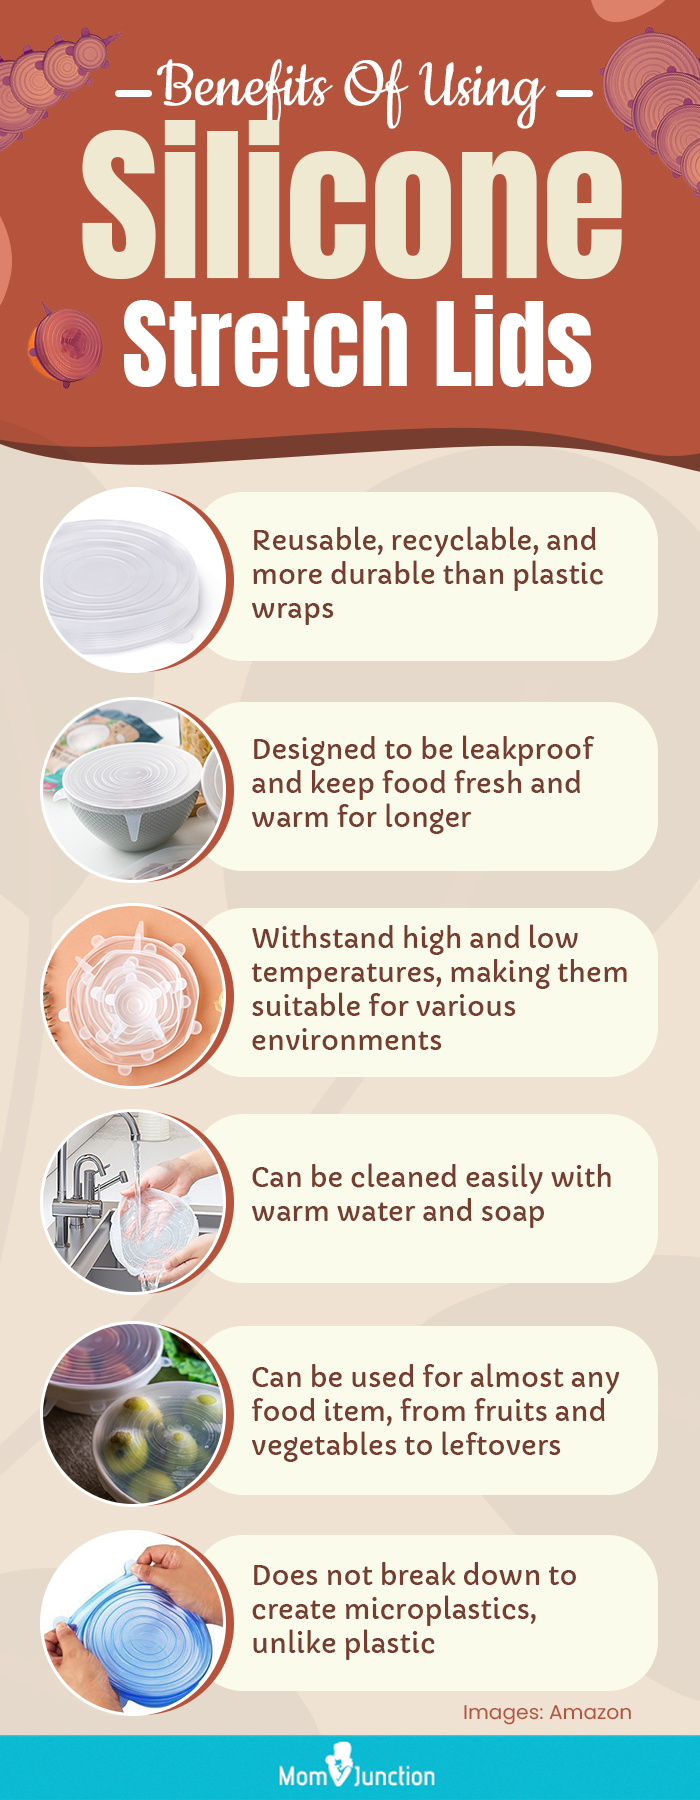 Benefits Of Using Silicone Stretch Lids (infographic)